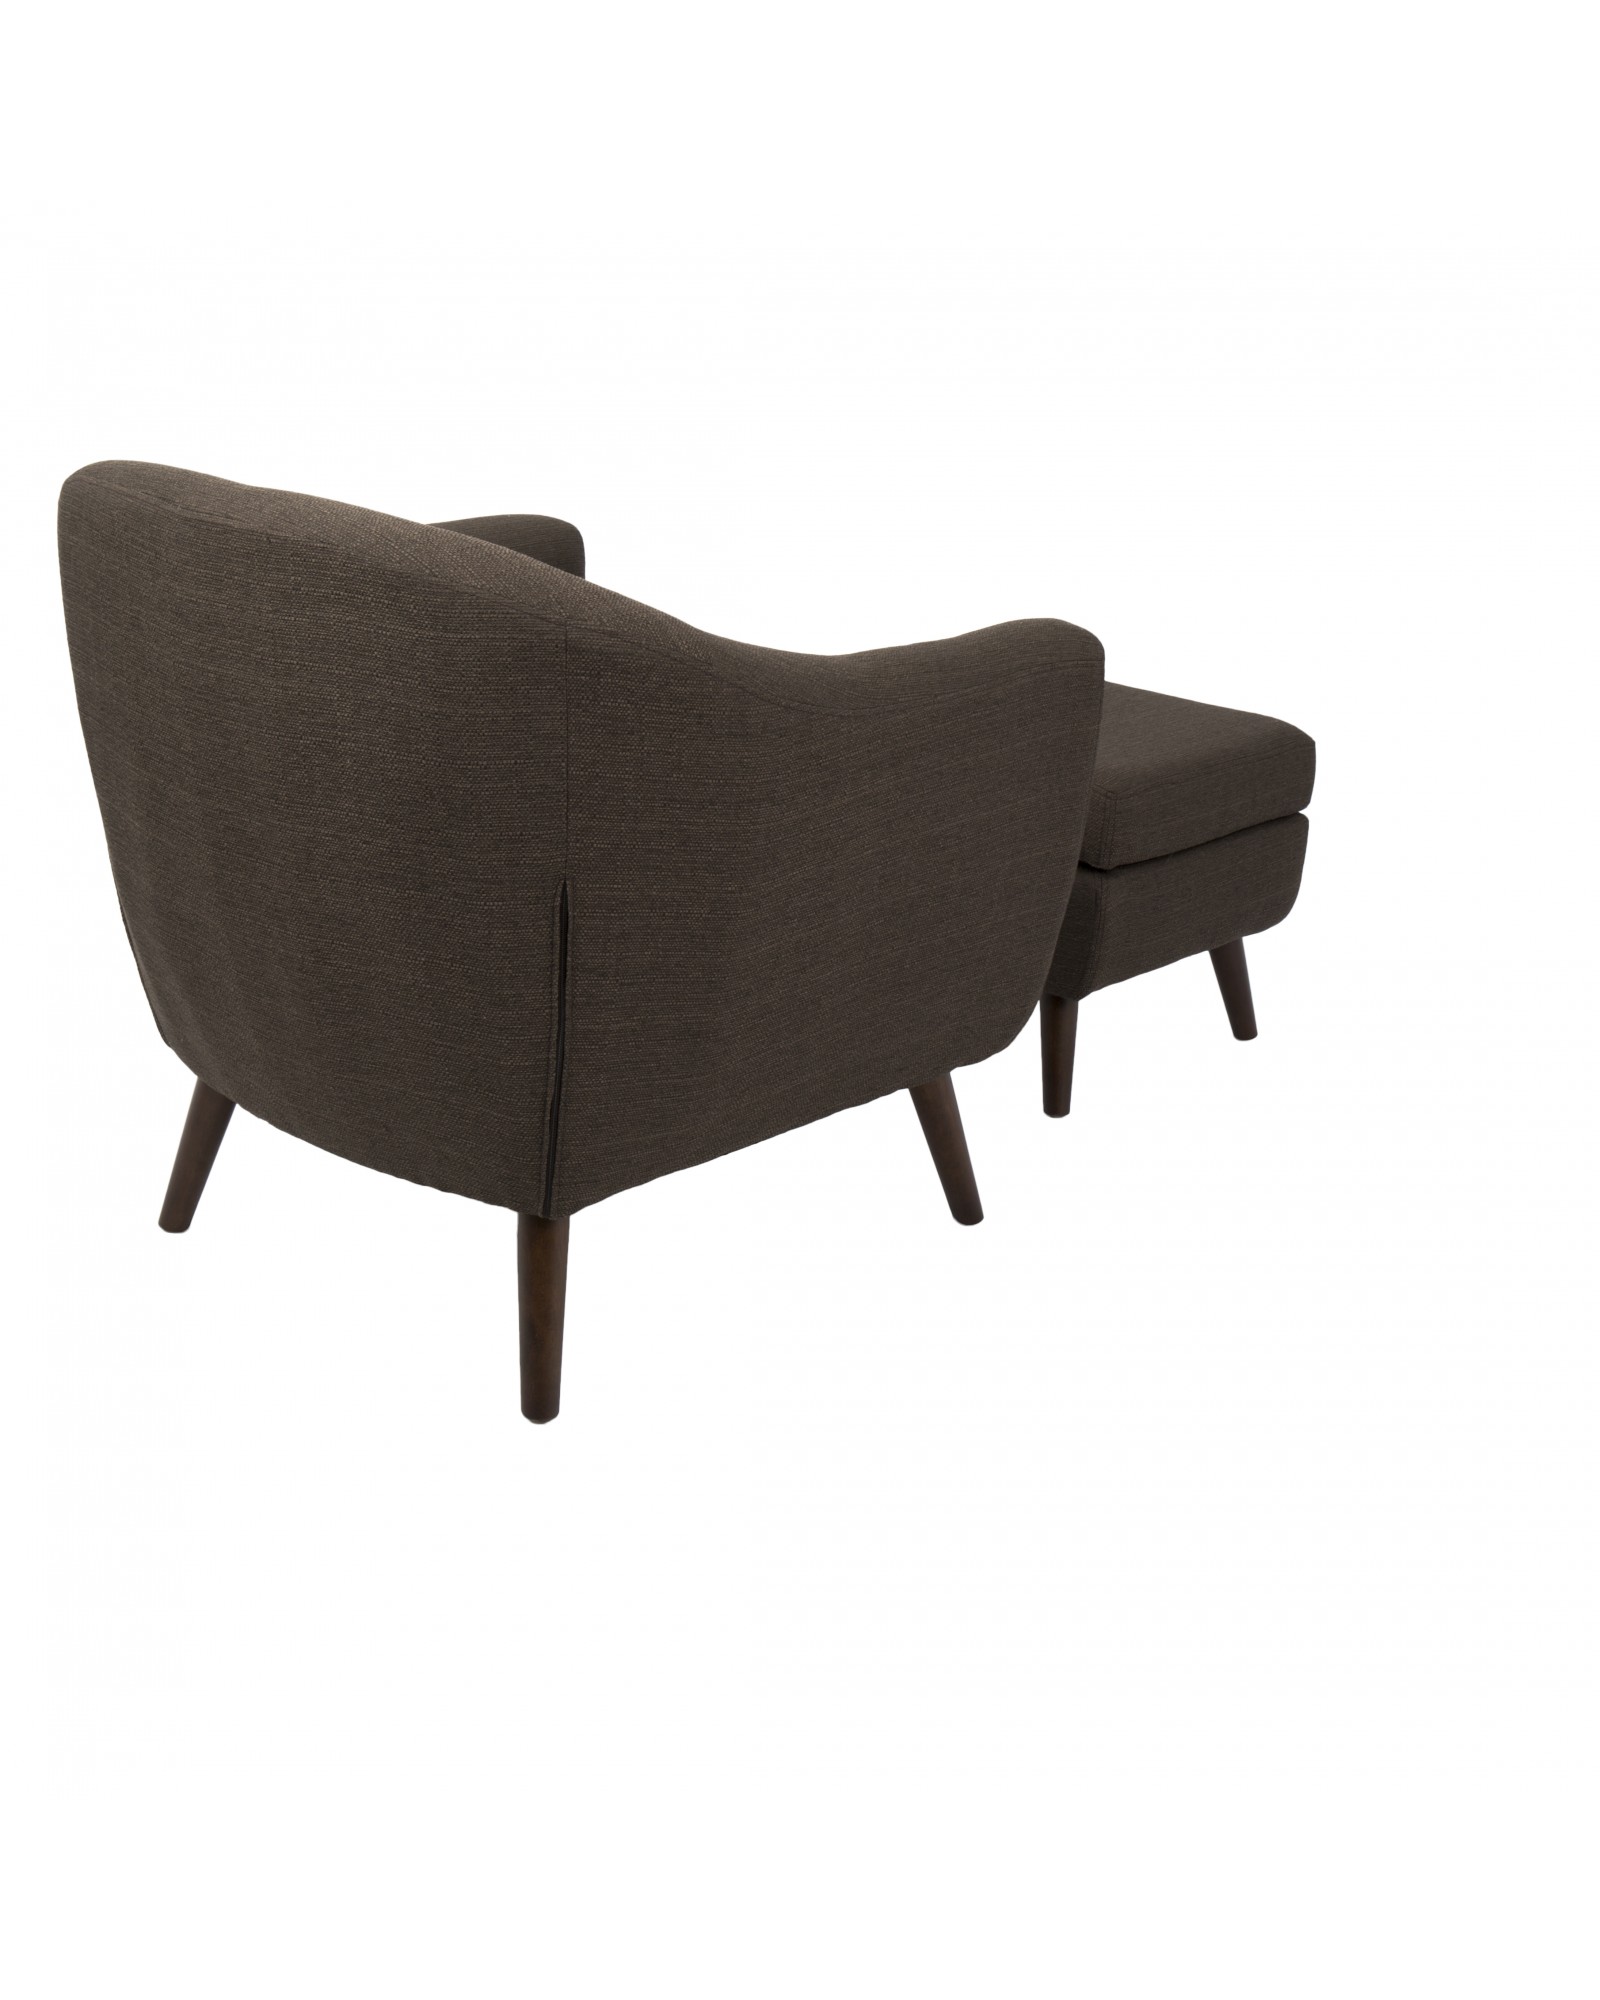 Rockwell Mid-Century Modern Accent Chair and Ottoman in Espresso